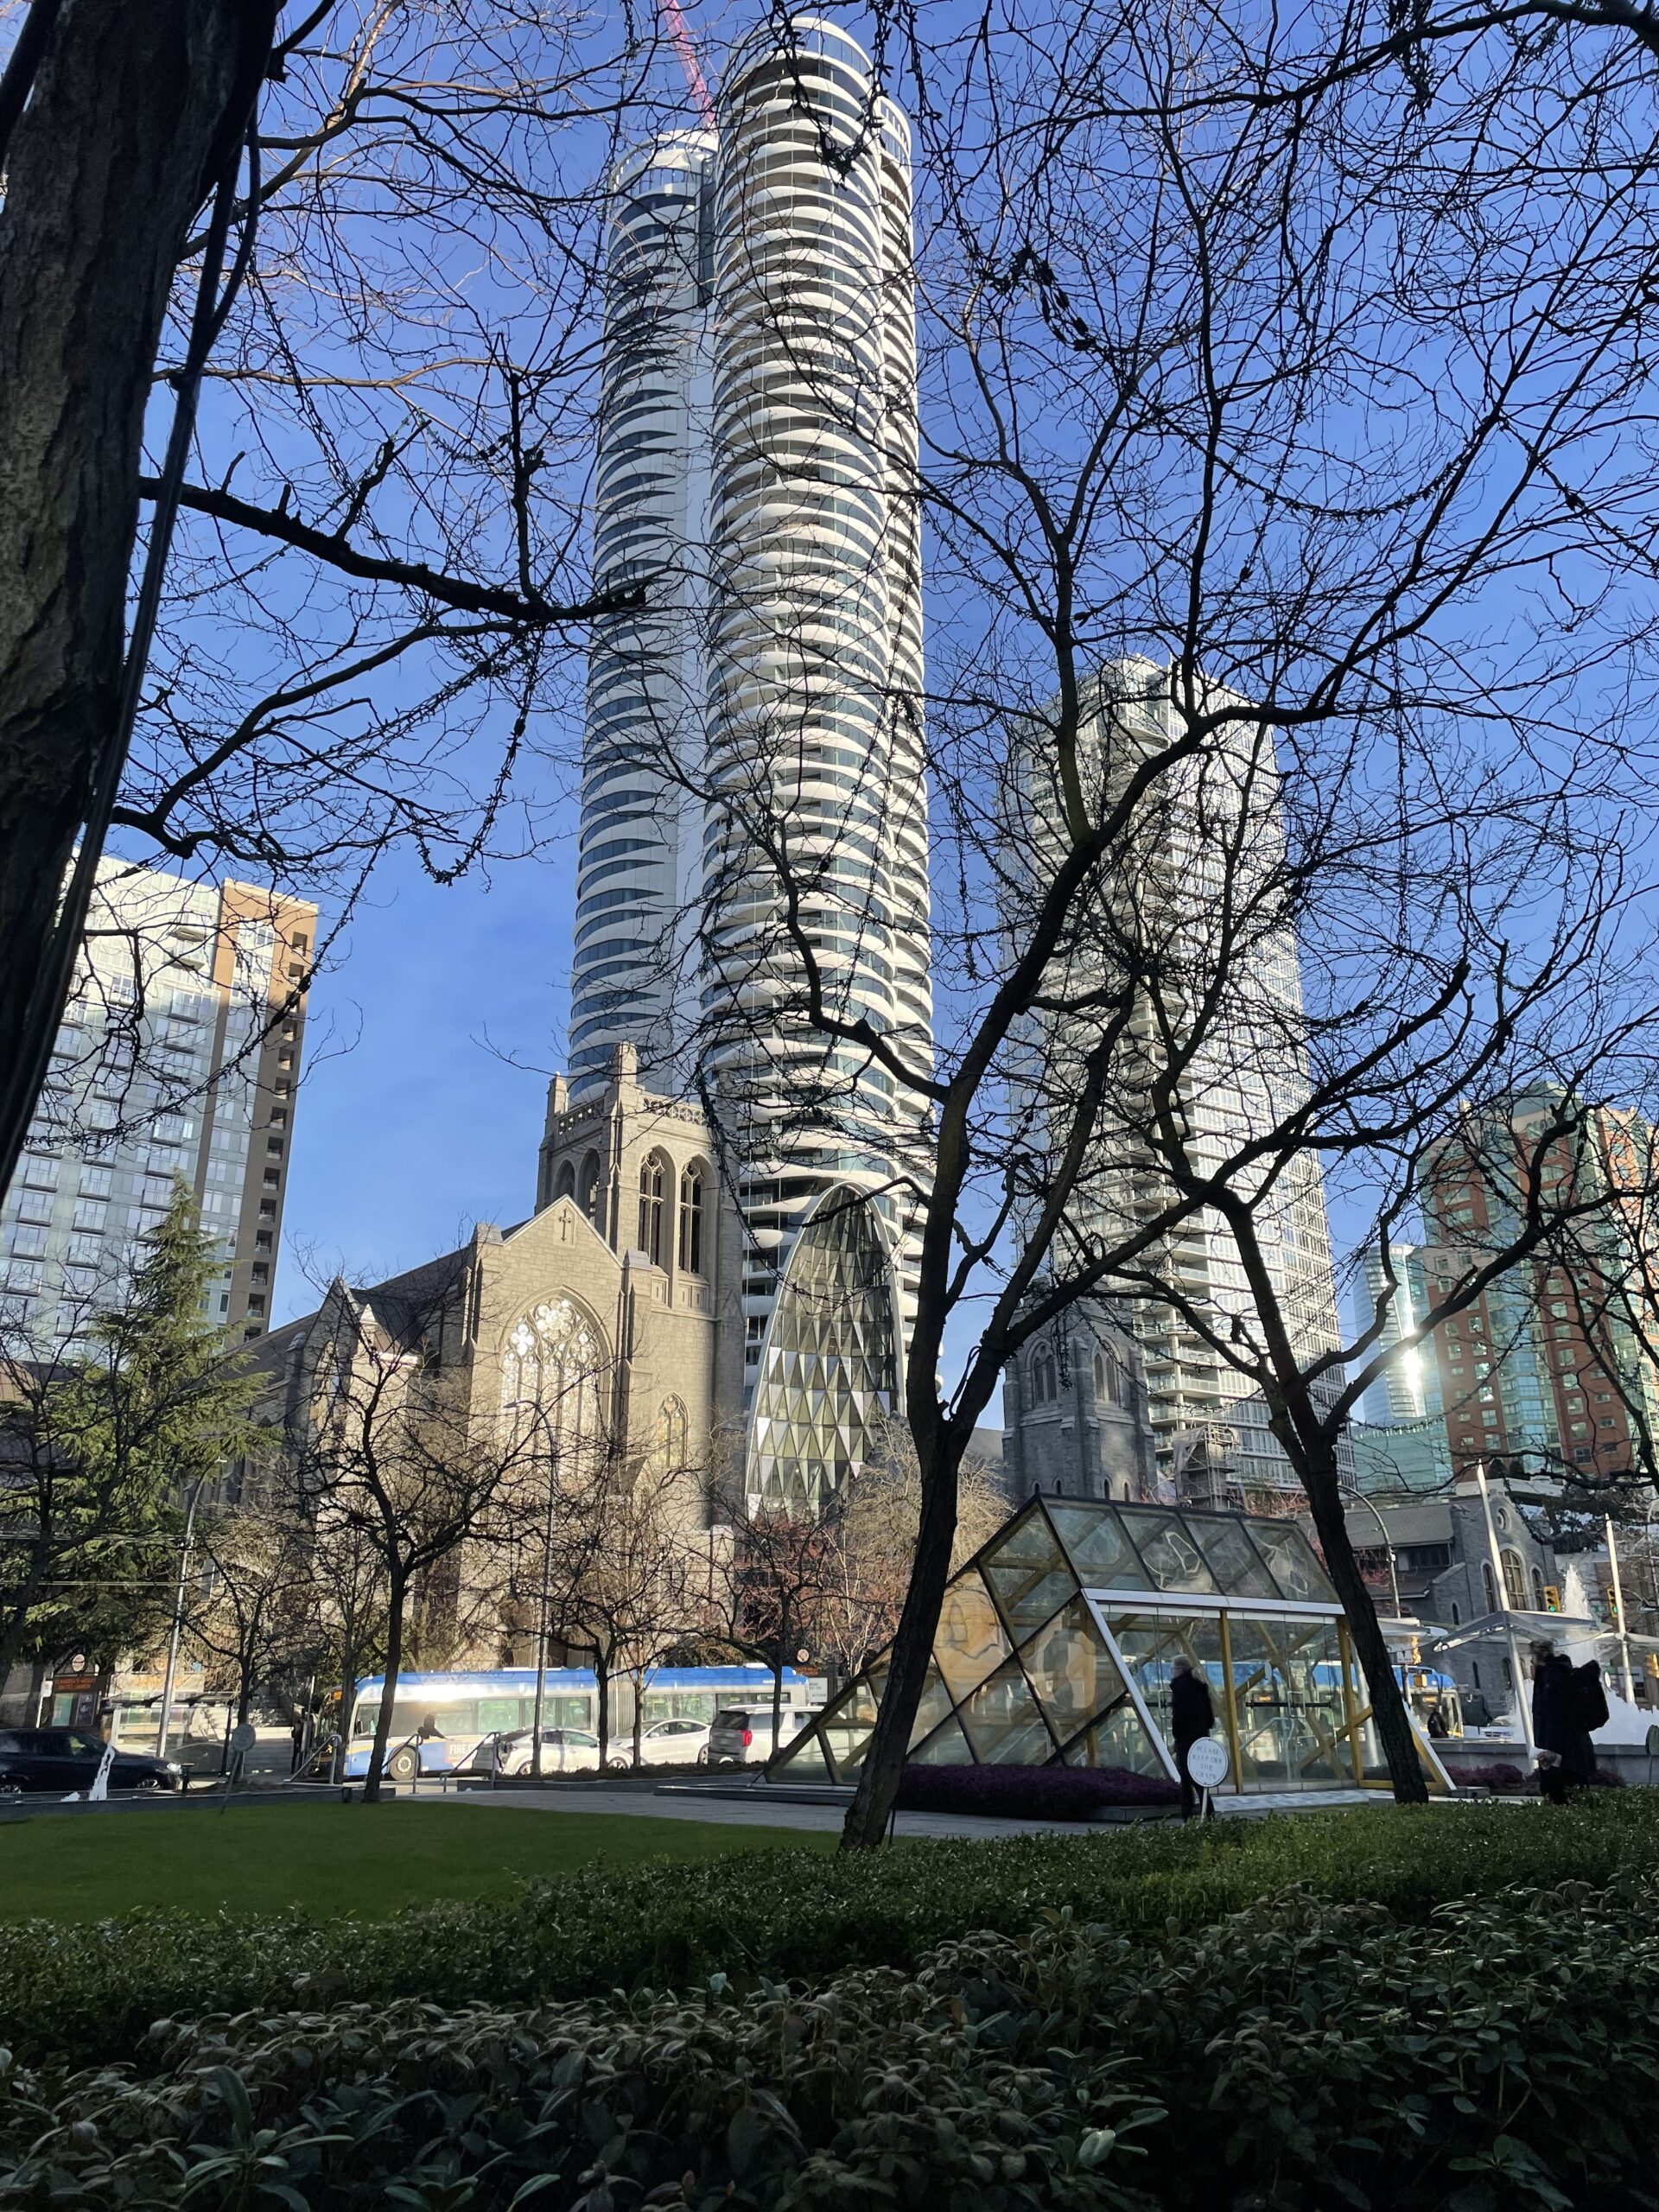 Given the nature of the conference, it seemed fitting that the view from the main conference venue, The WALL Centre, so nicely captured a range of Vancouver architectural styles. Photo by Bronwyn Smyth